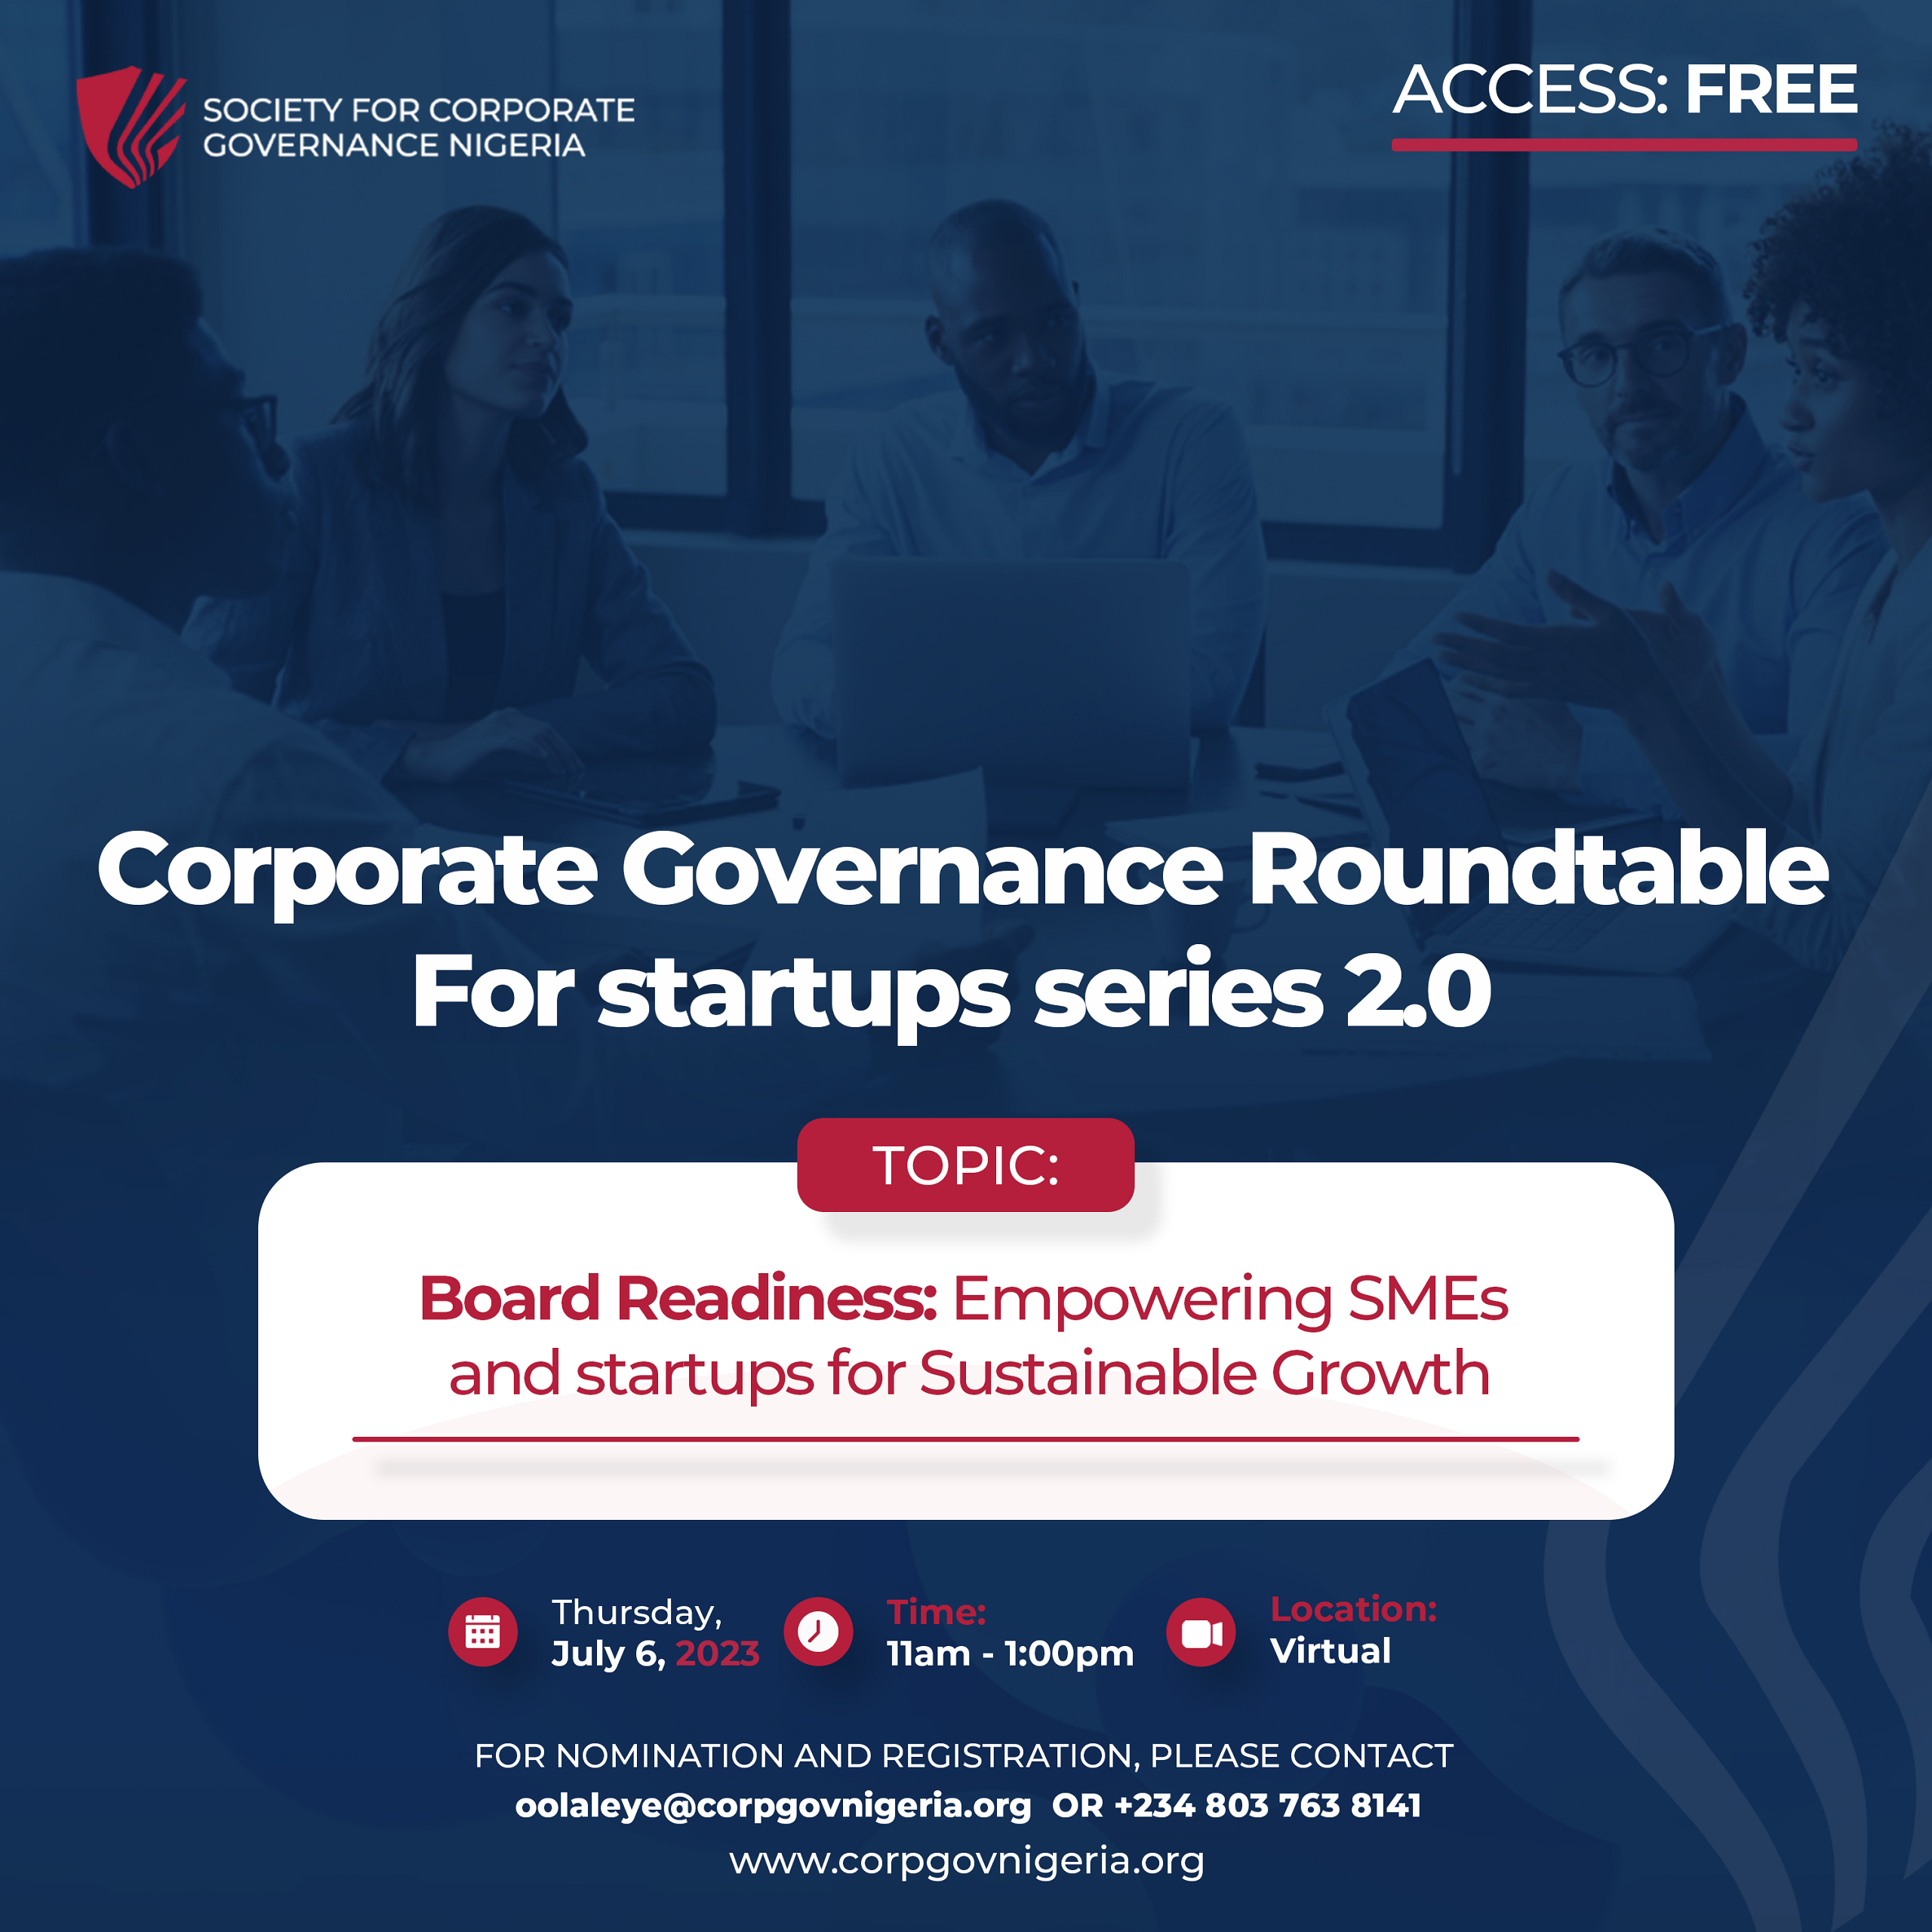 Corporate Governance Roundtable For Startups series 2.0